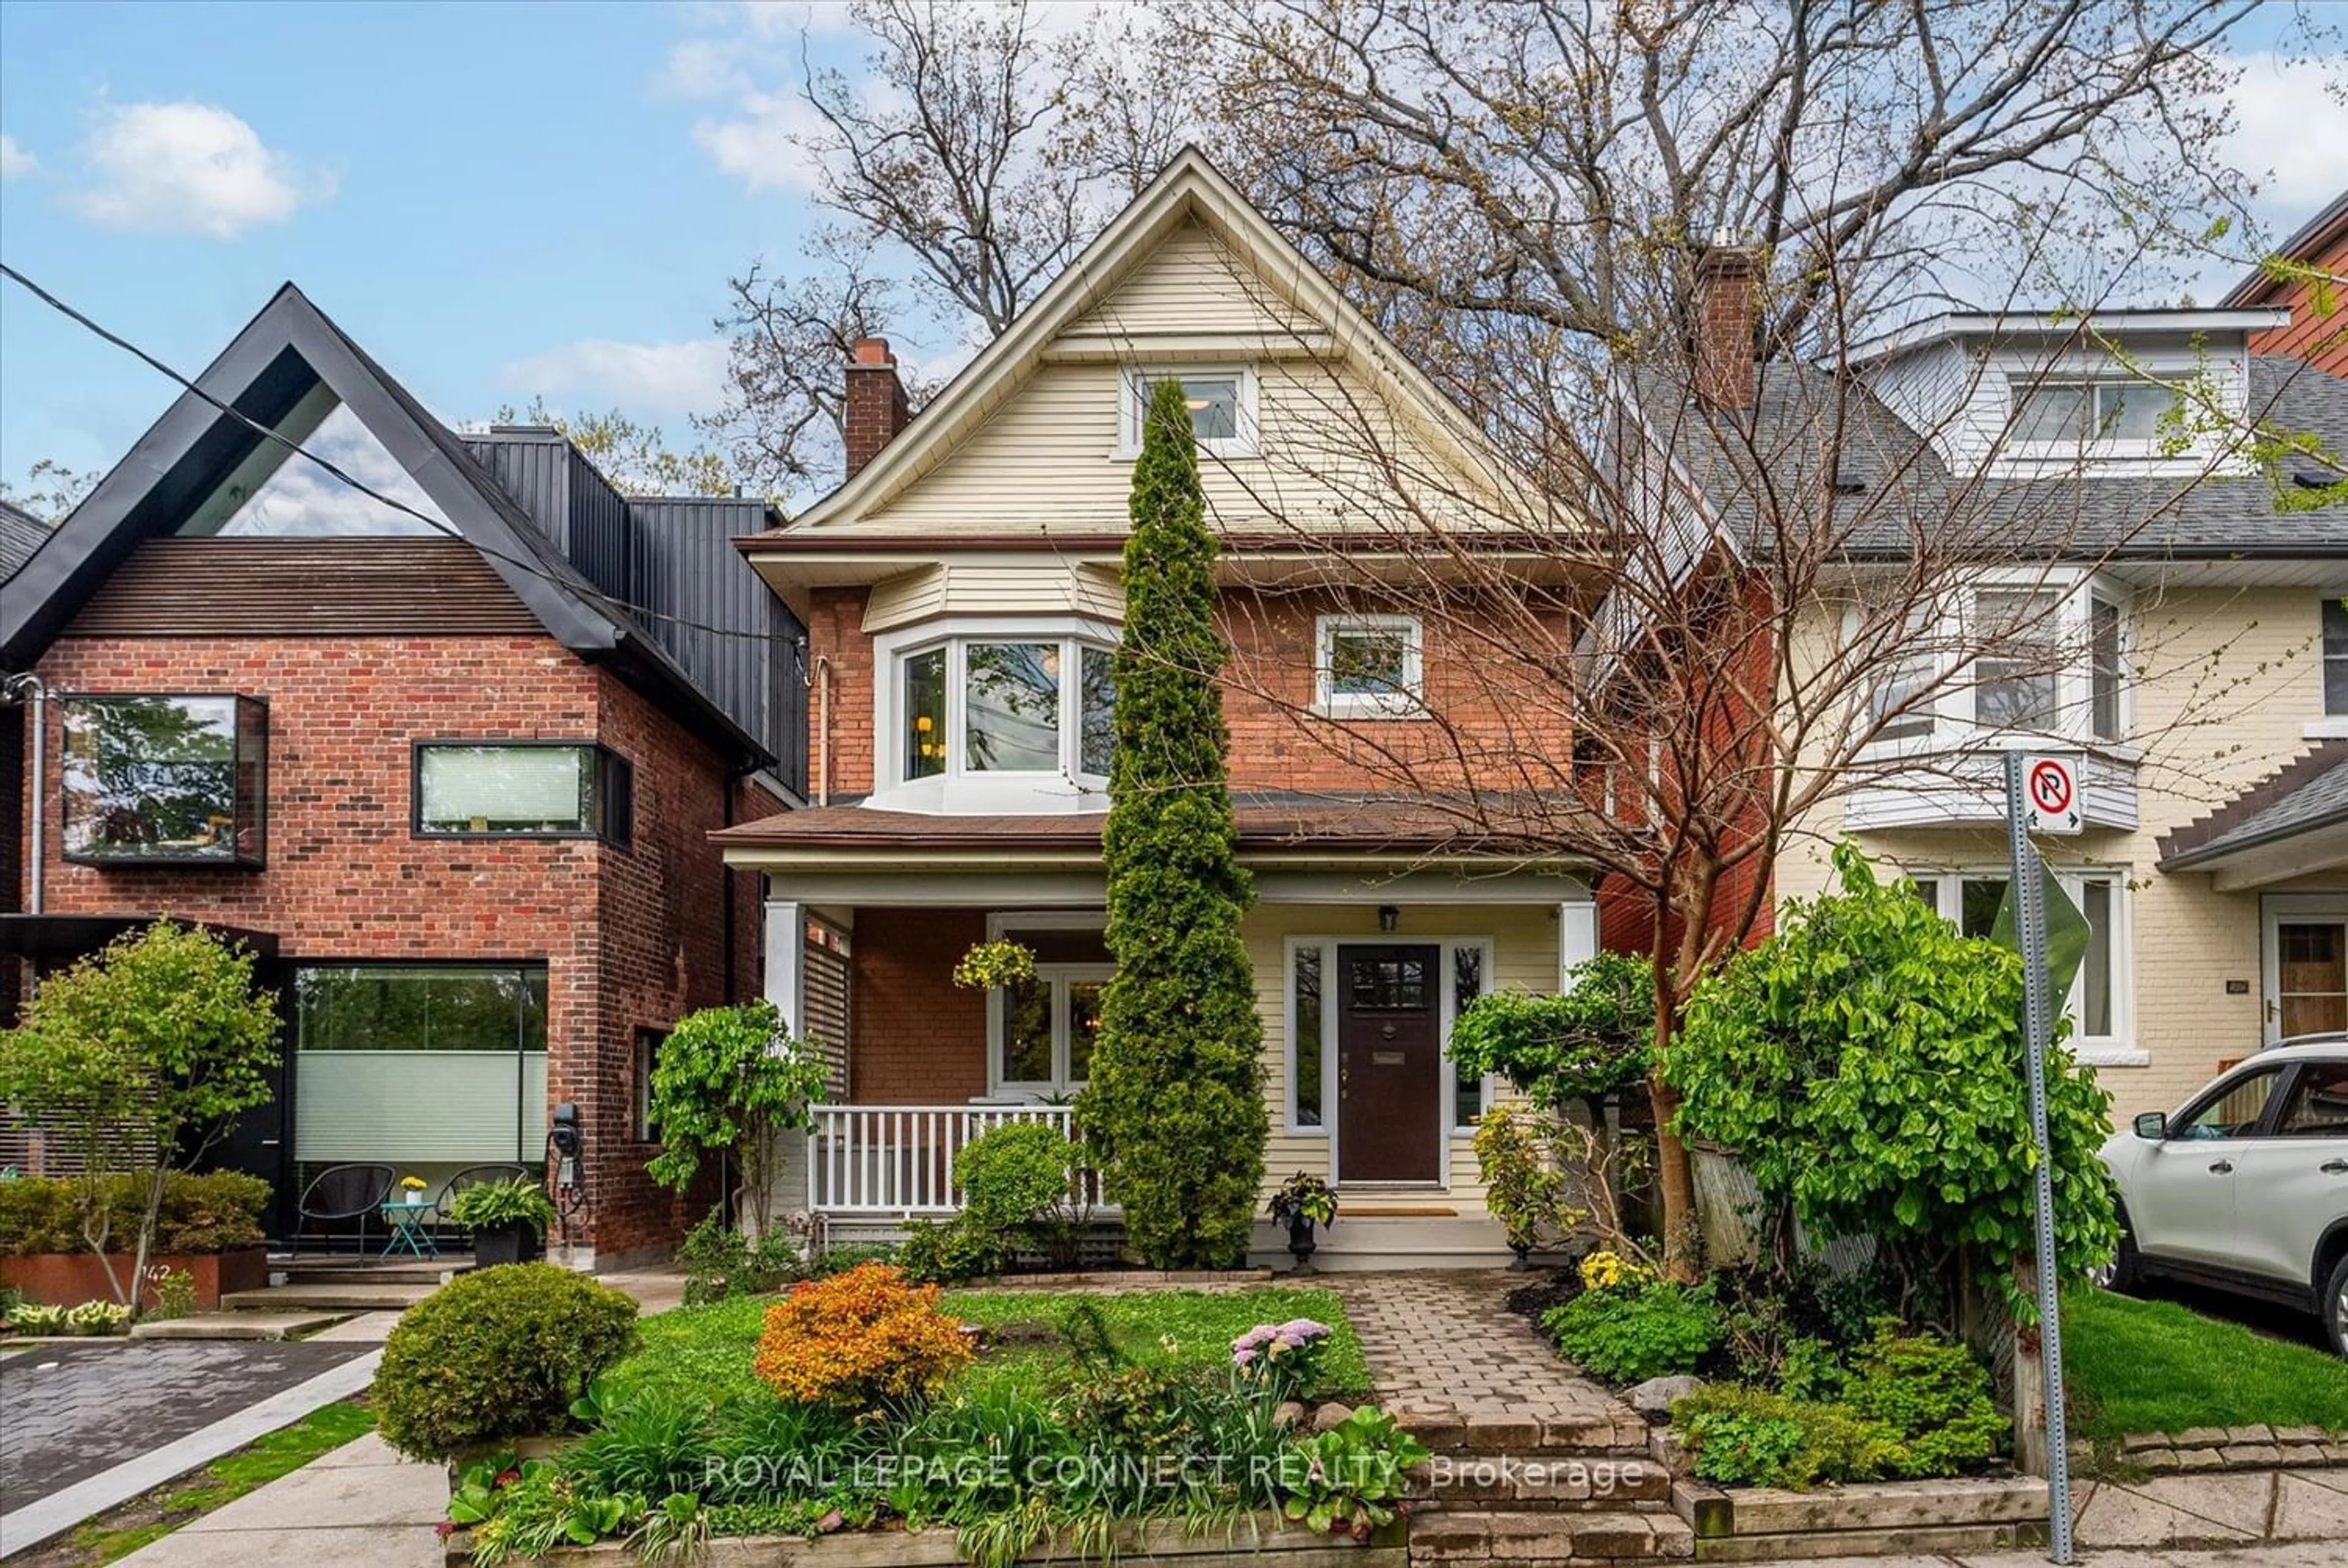 Home with brick exterior material for 144 Kenilworth Ave, Toronto Ontario M4L 3S6